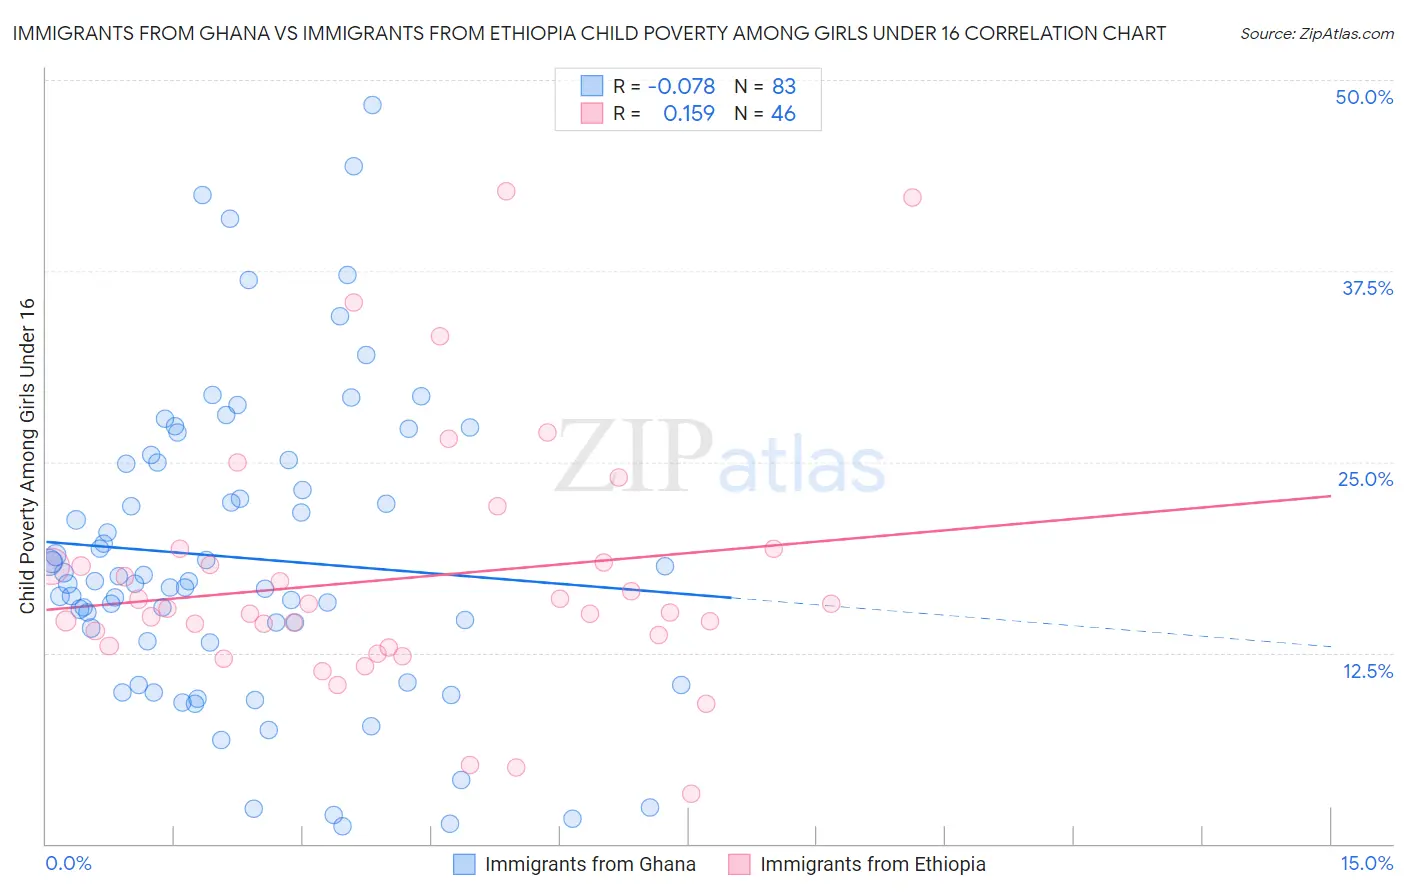 Immigrants from Ghana vs Immigrants from Ethiopia Child Poverty Among Girls Under 16